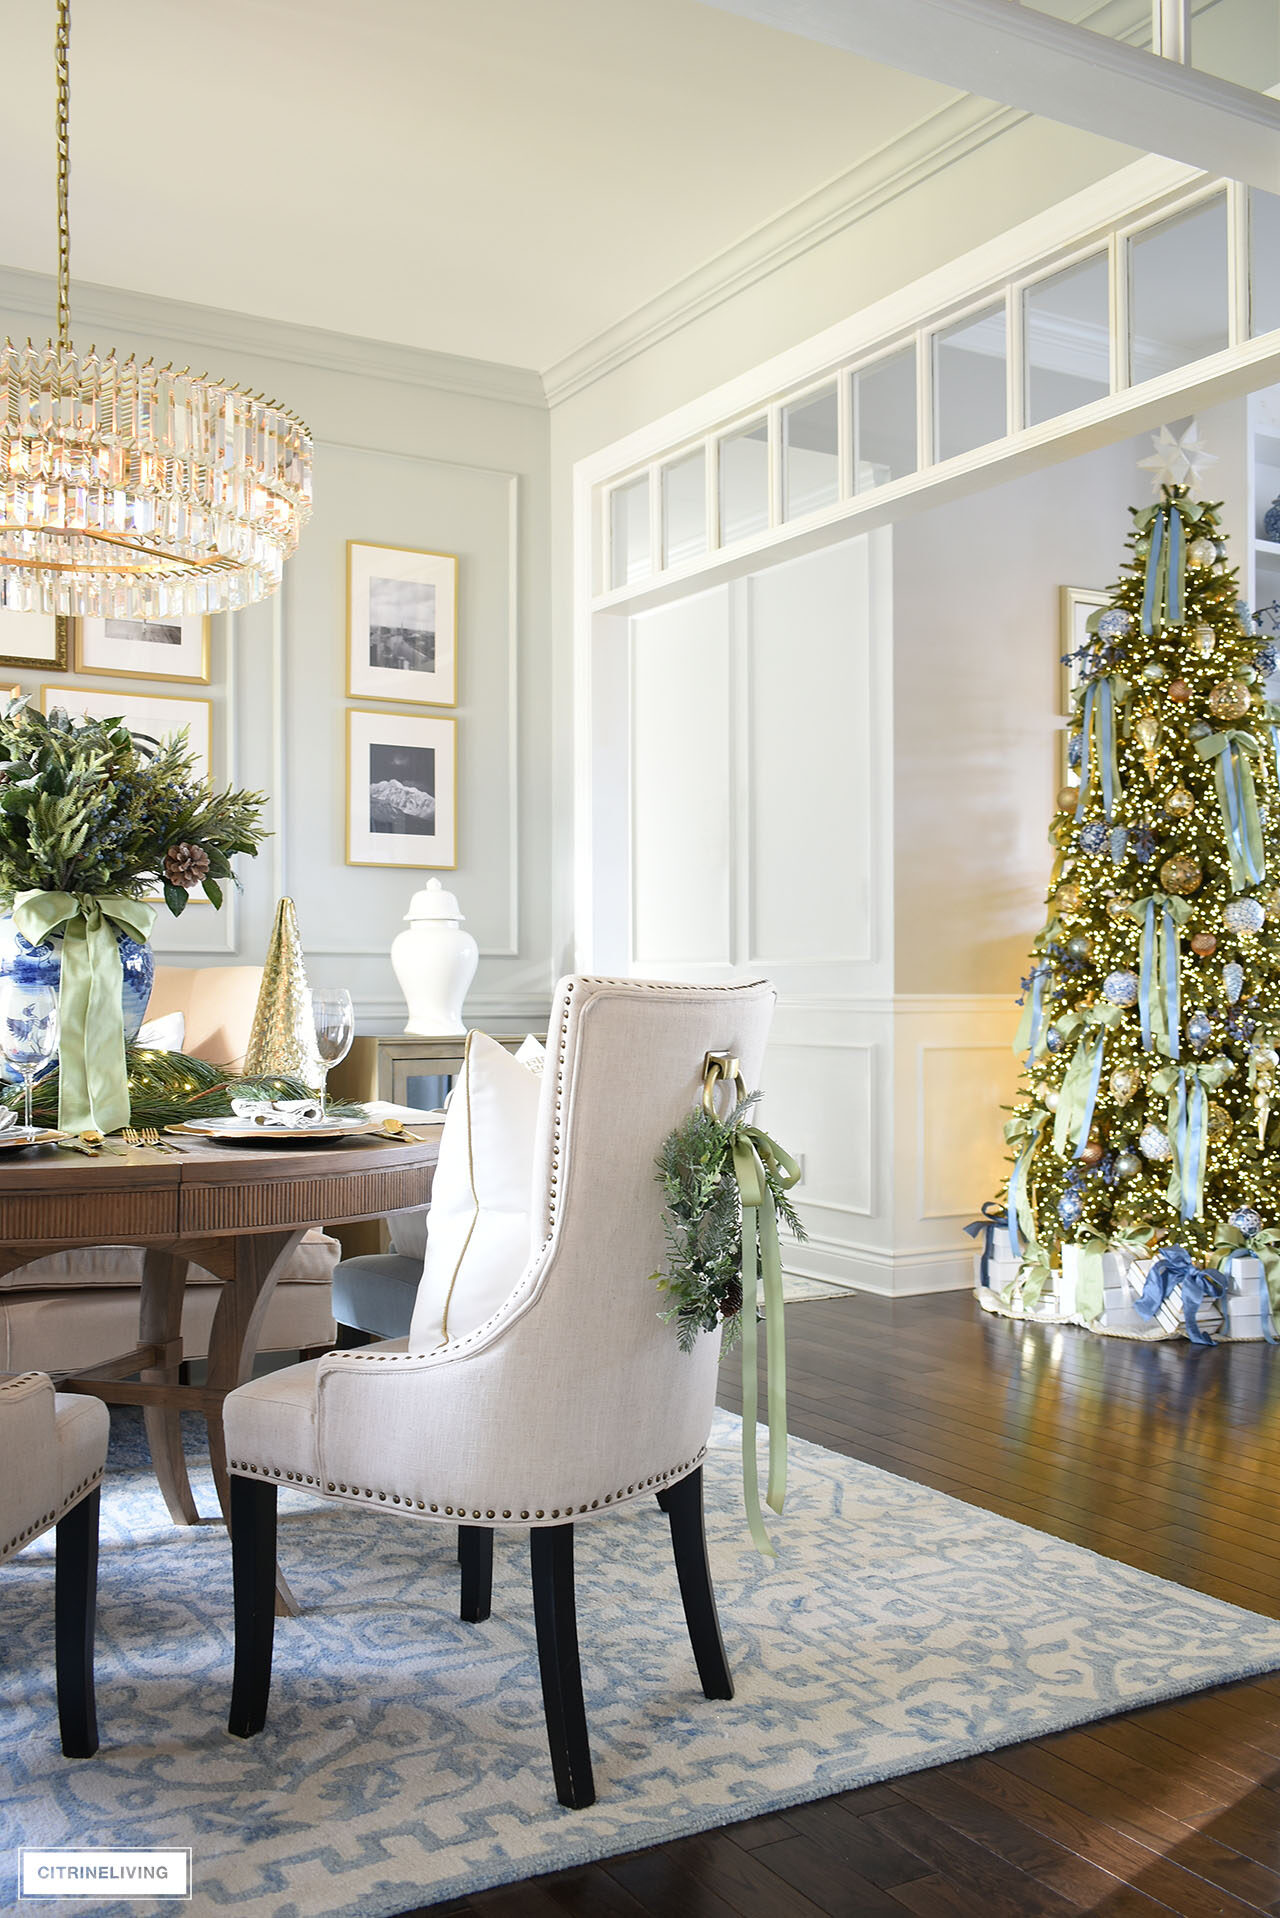 Dining room decorated for Christmas with greenery accents, blue and white chinoiserie, silver and gold table settings and a view of a Christmas tree in the next room.